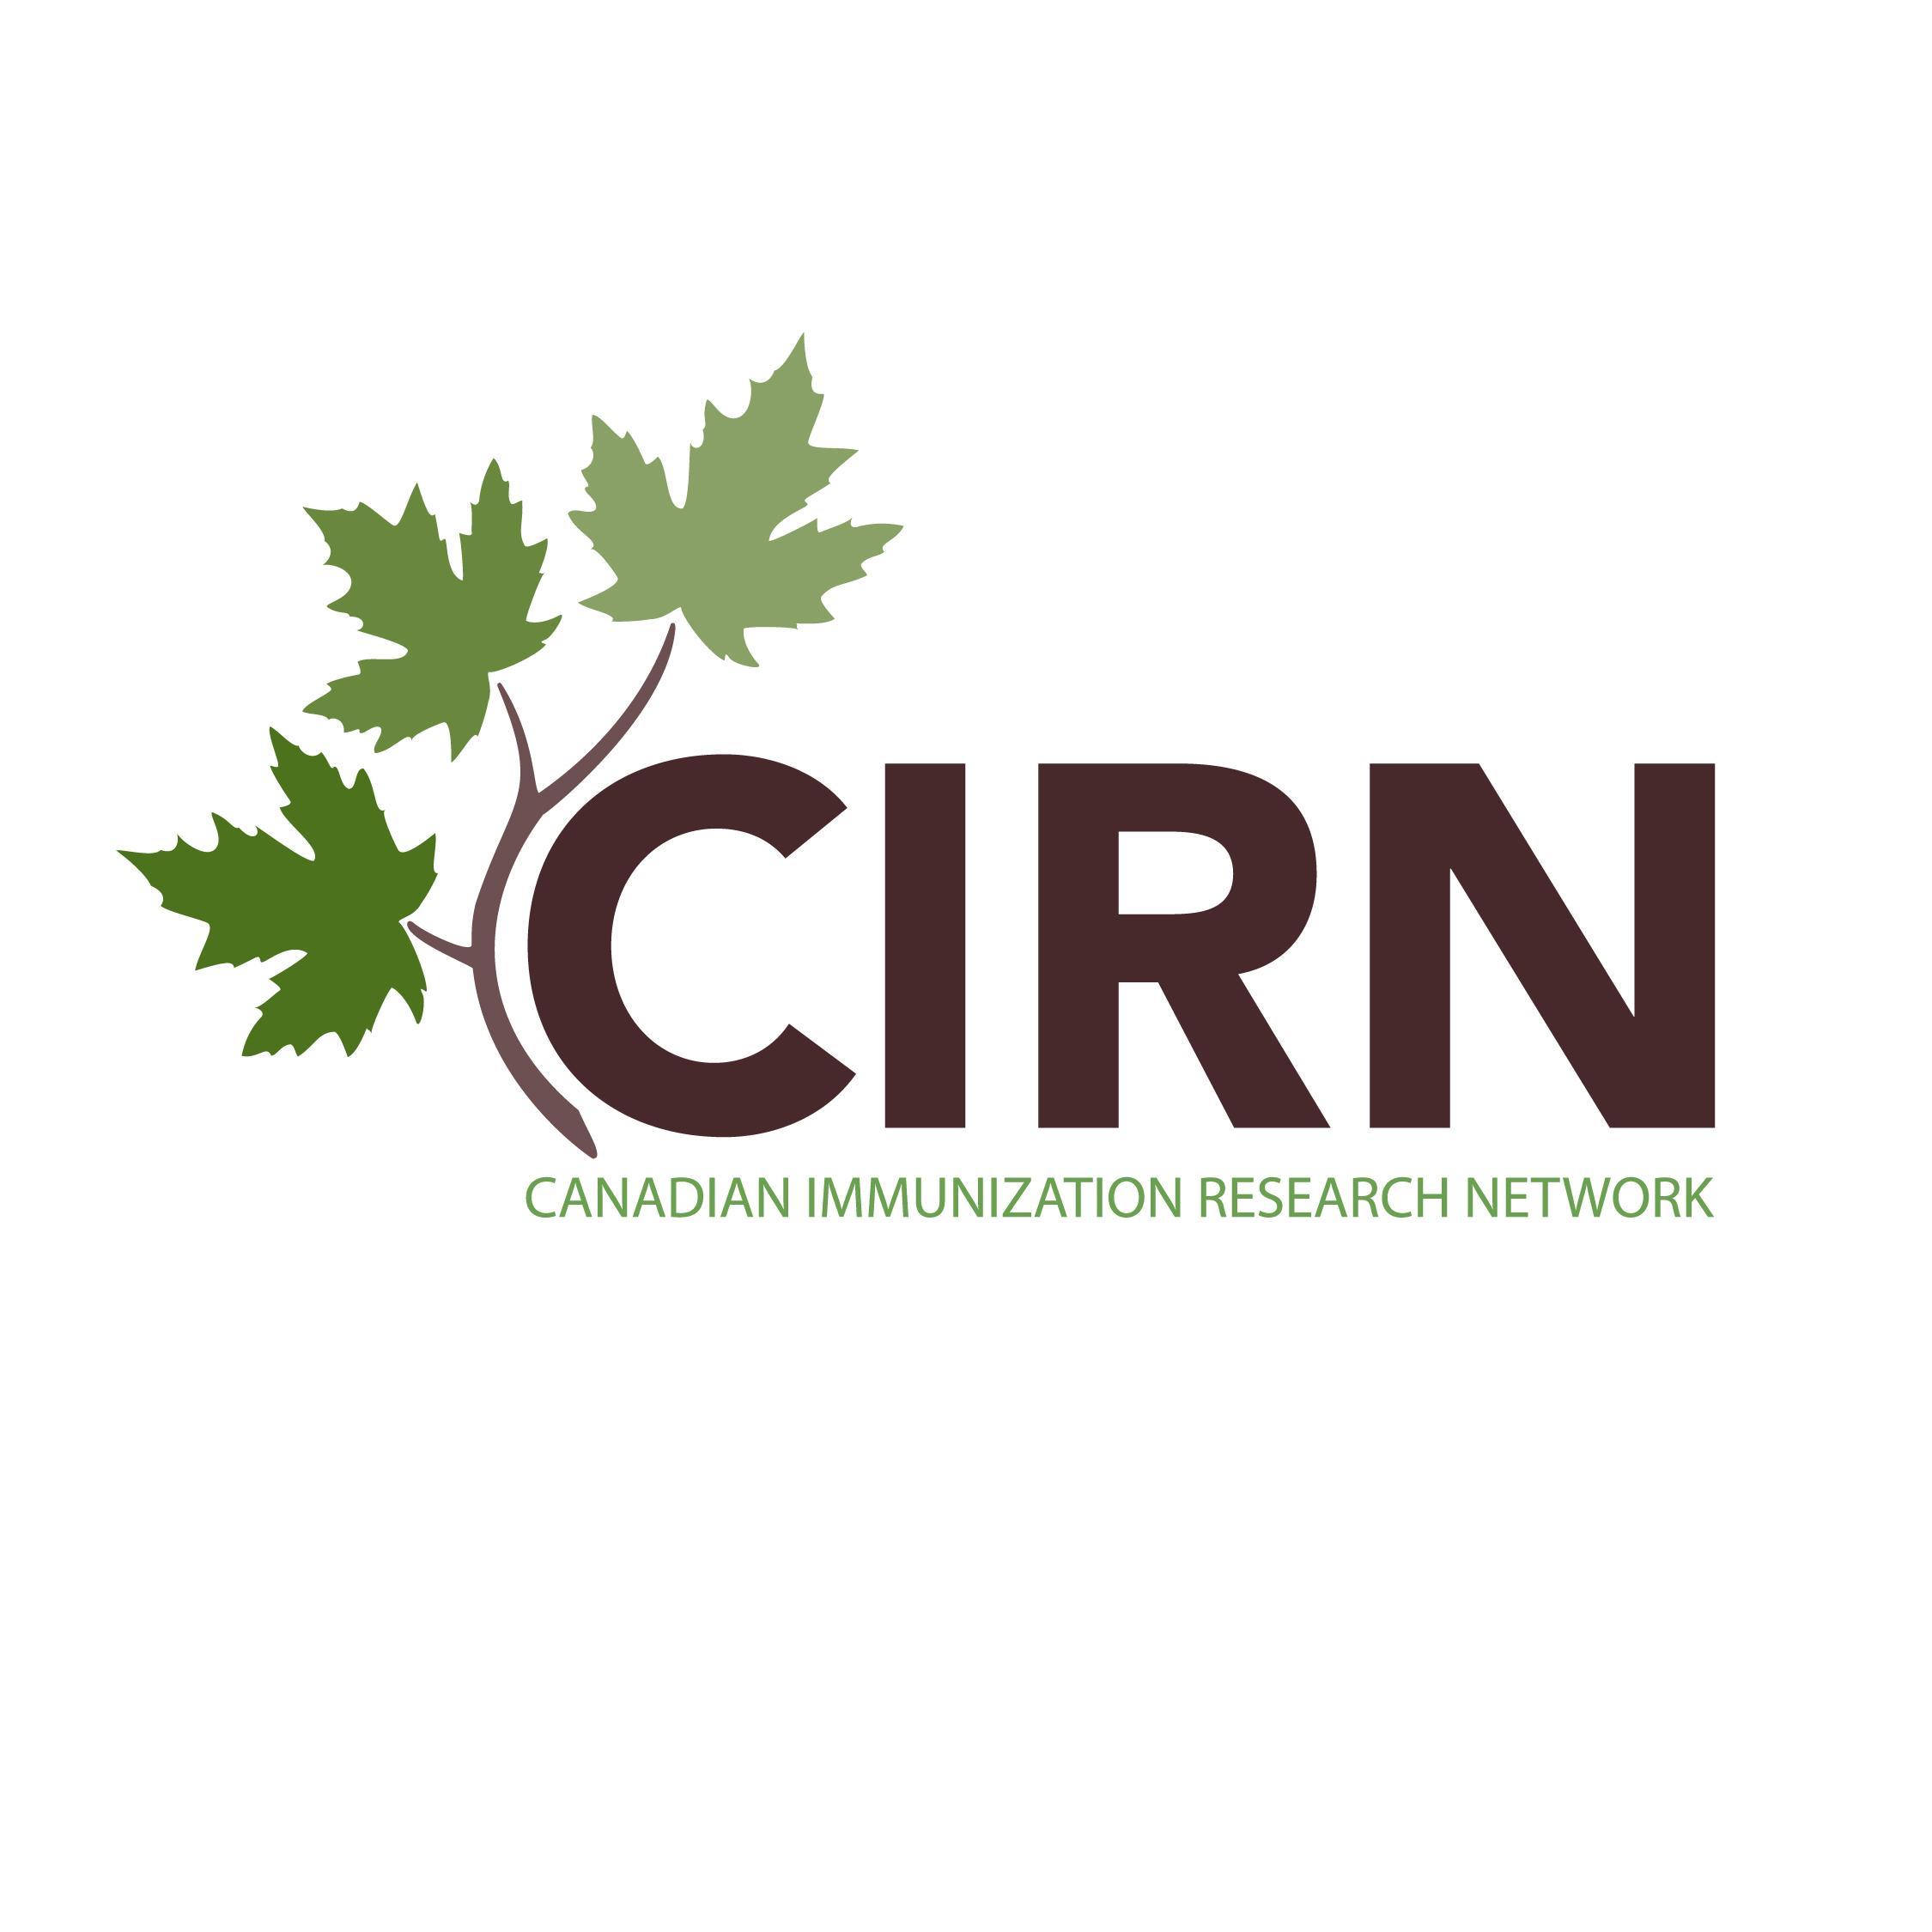 The Canadian Immunization Research Network (CIRN) is a national network of leading vaccine researchers, divided into eight research sub-networks.